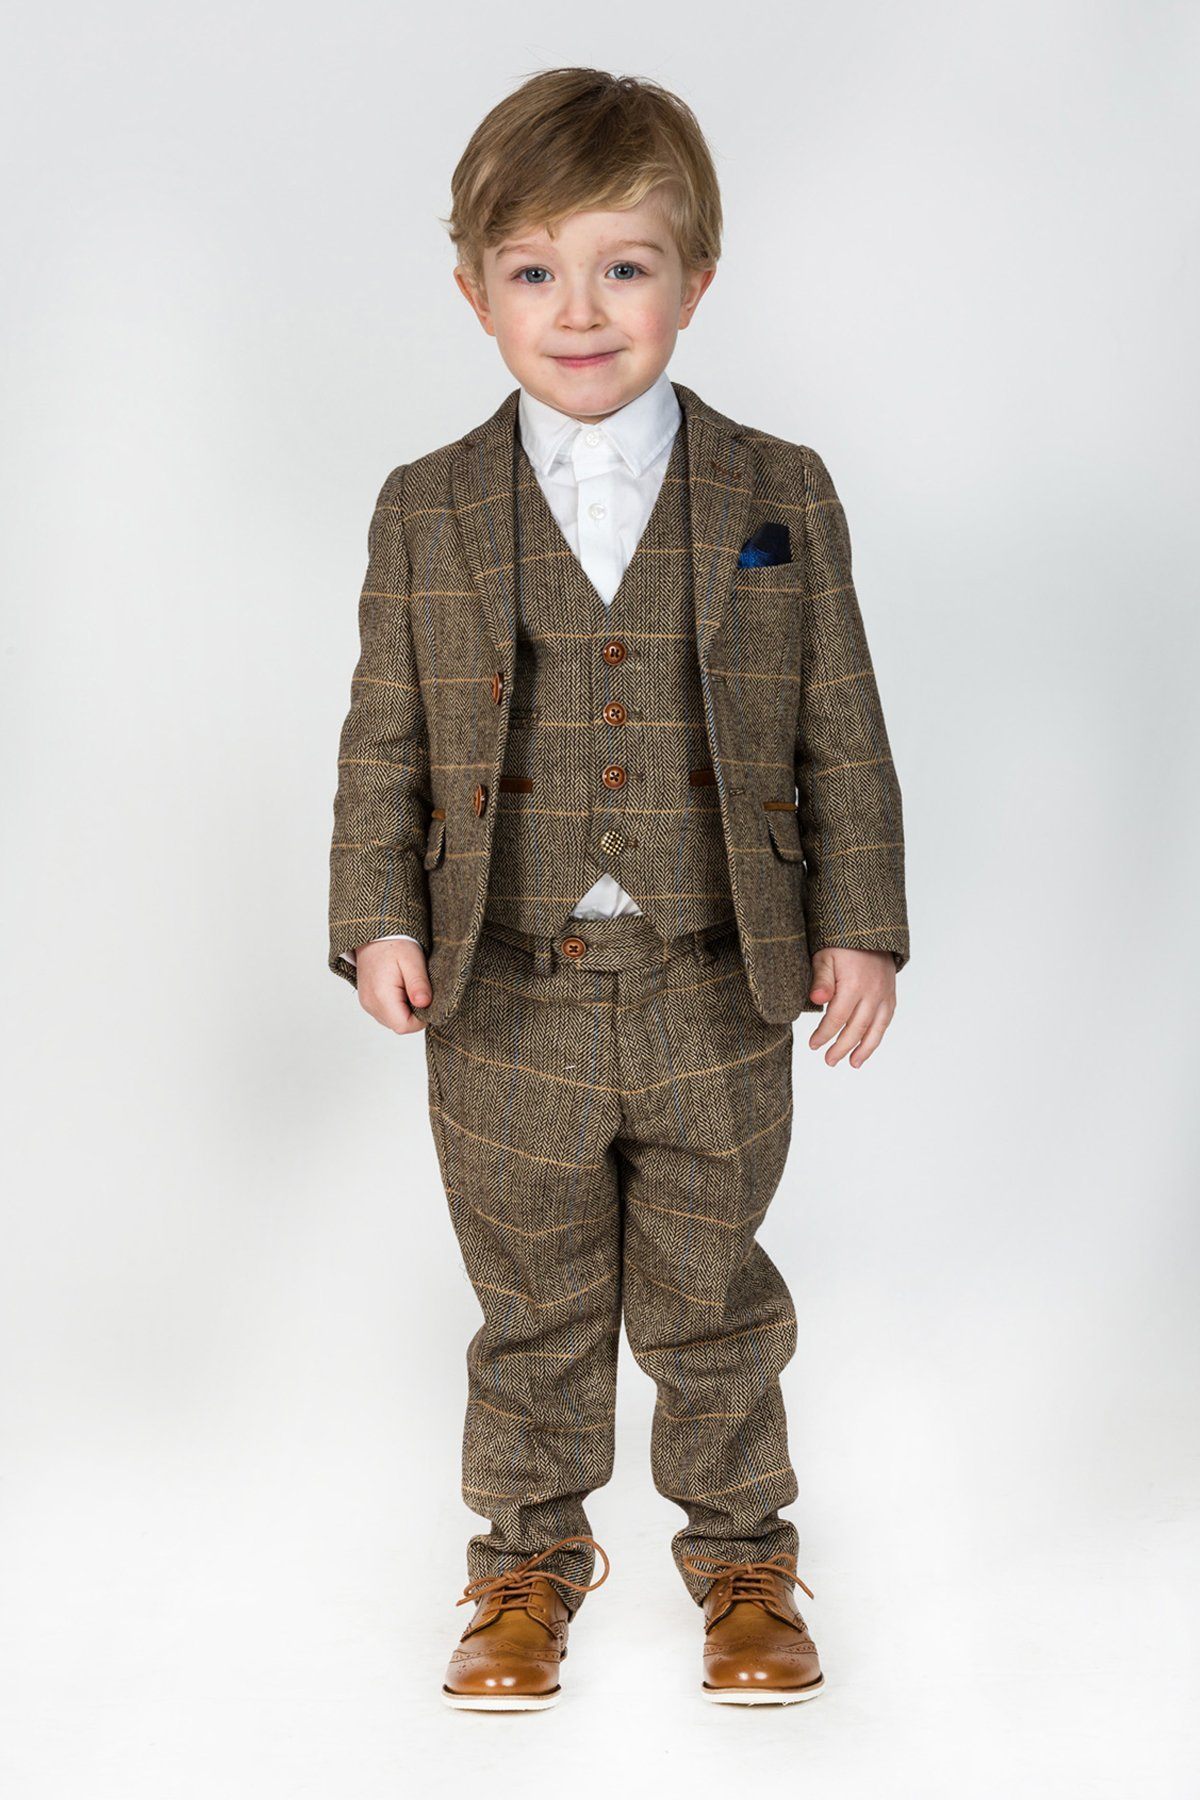 Ted Children’s Tan Tonal Check Tweed Three Piece Suit